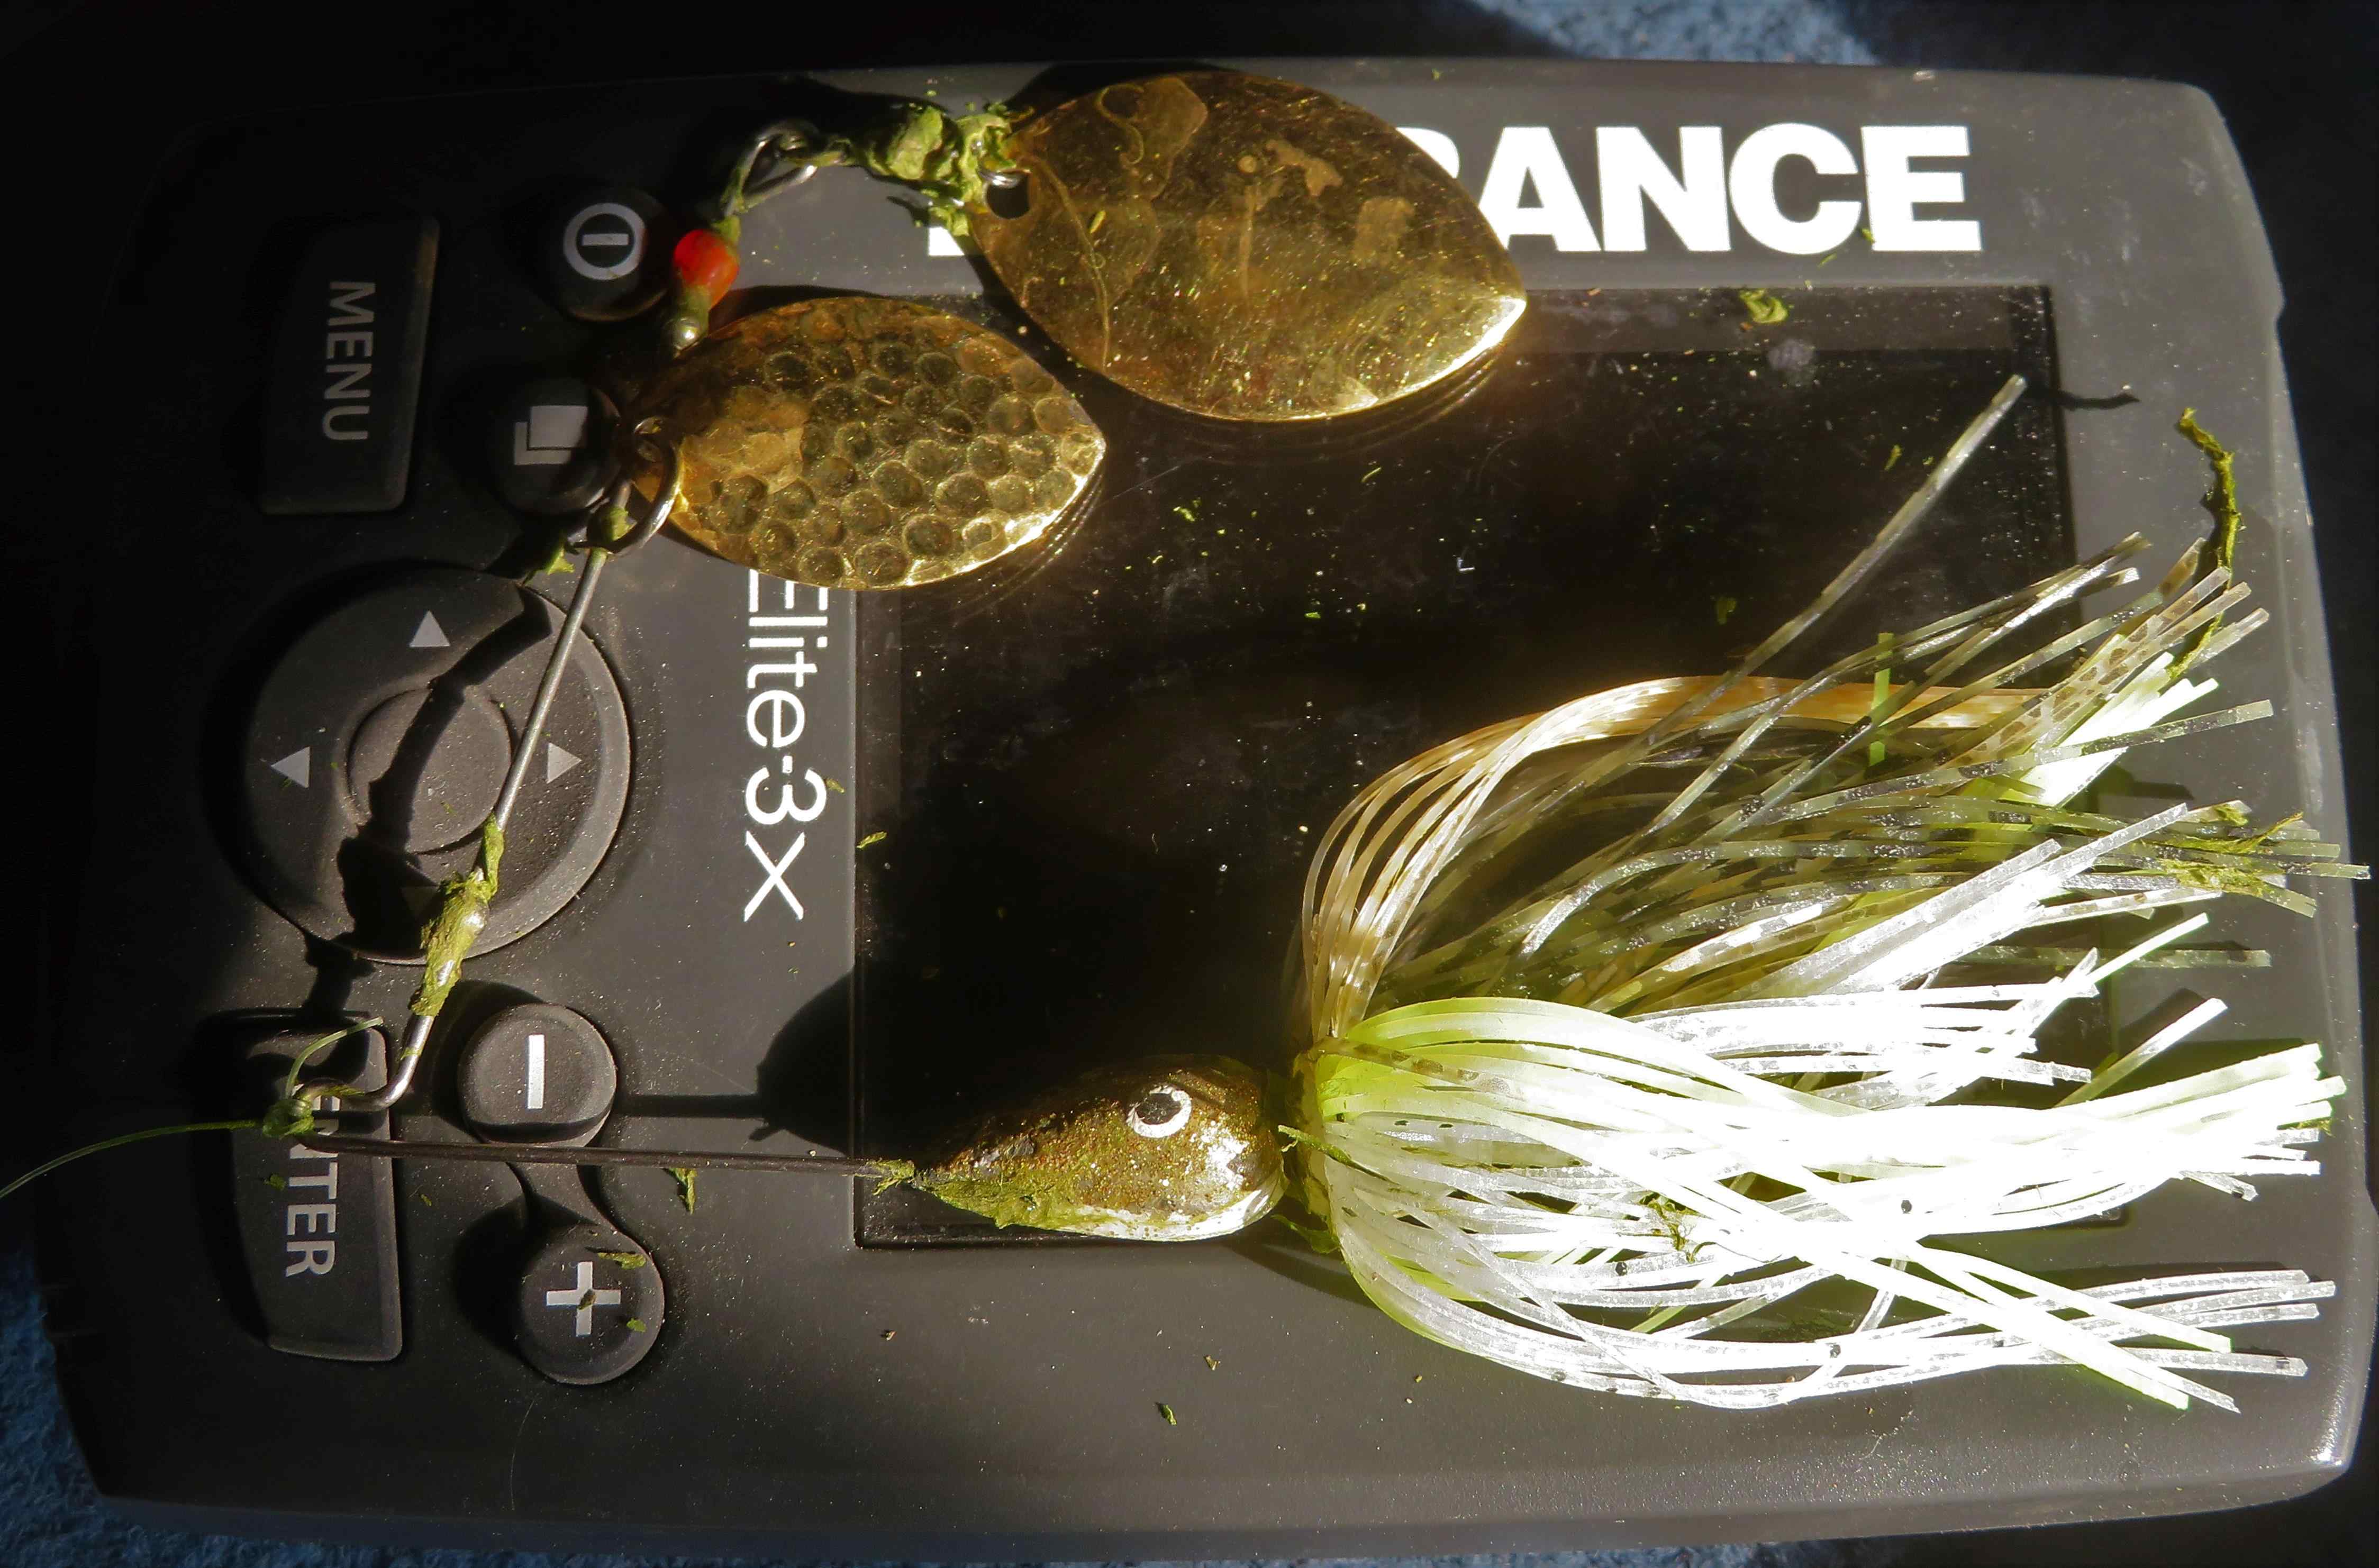 SwingBlade™ Spinnerbaits For Bass Fishing Open Water